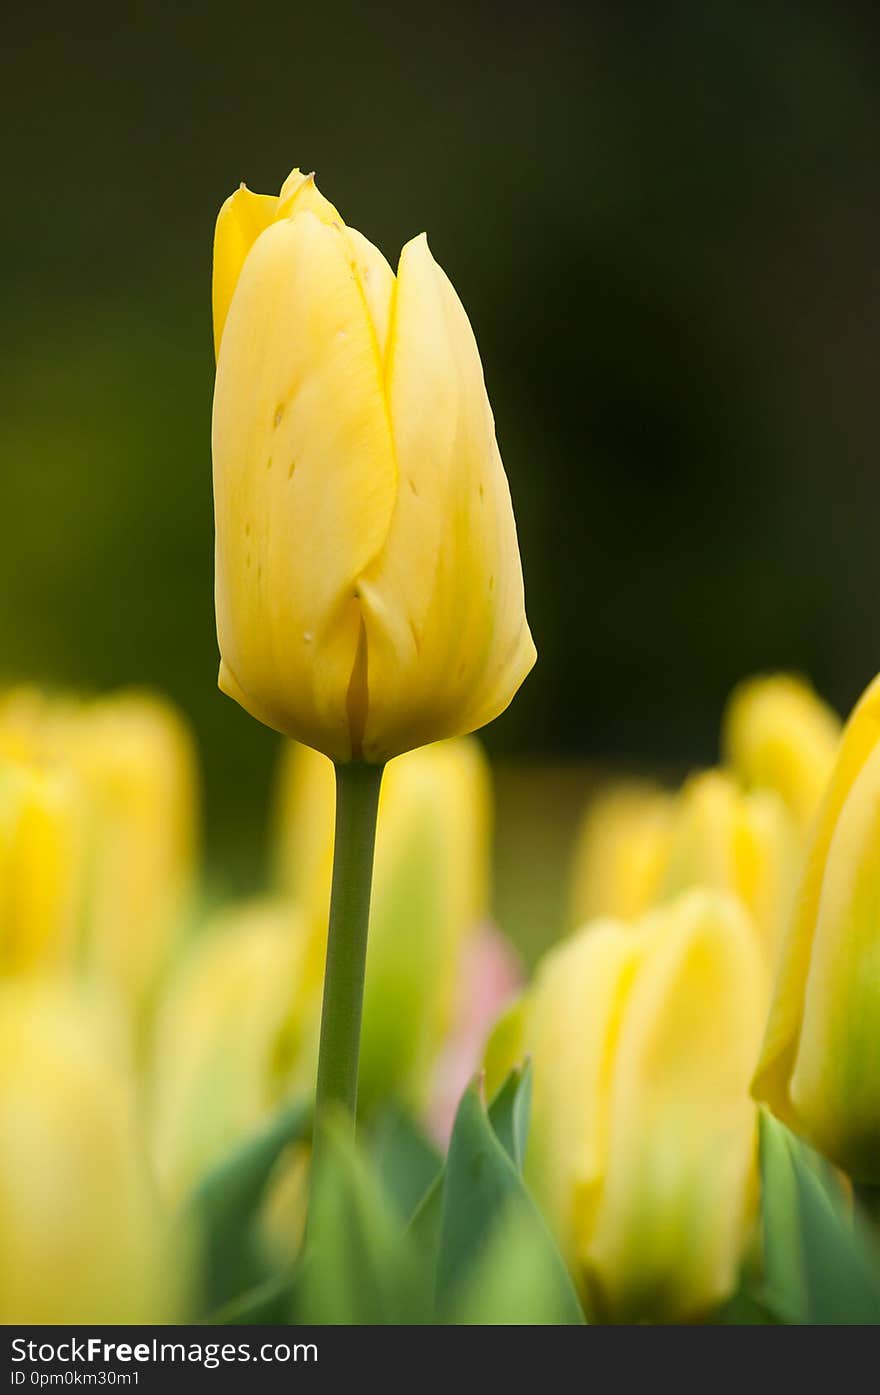 Group of yellow Tulips in a tulips field